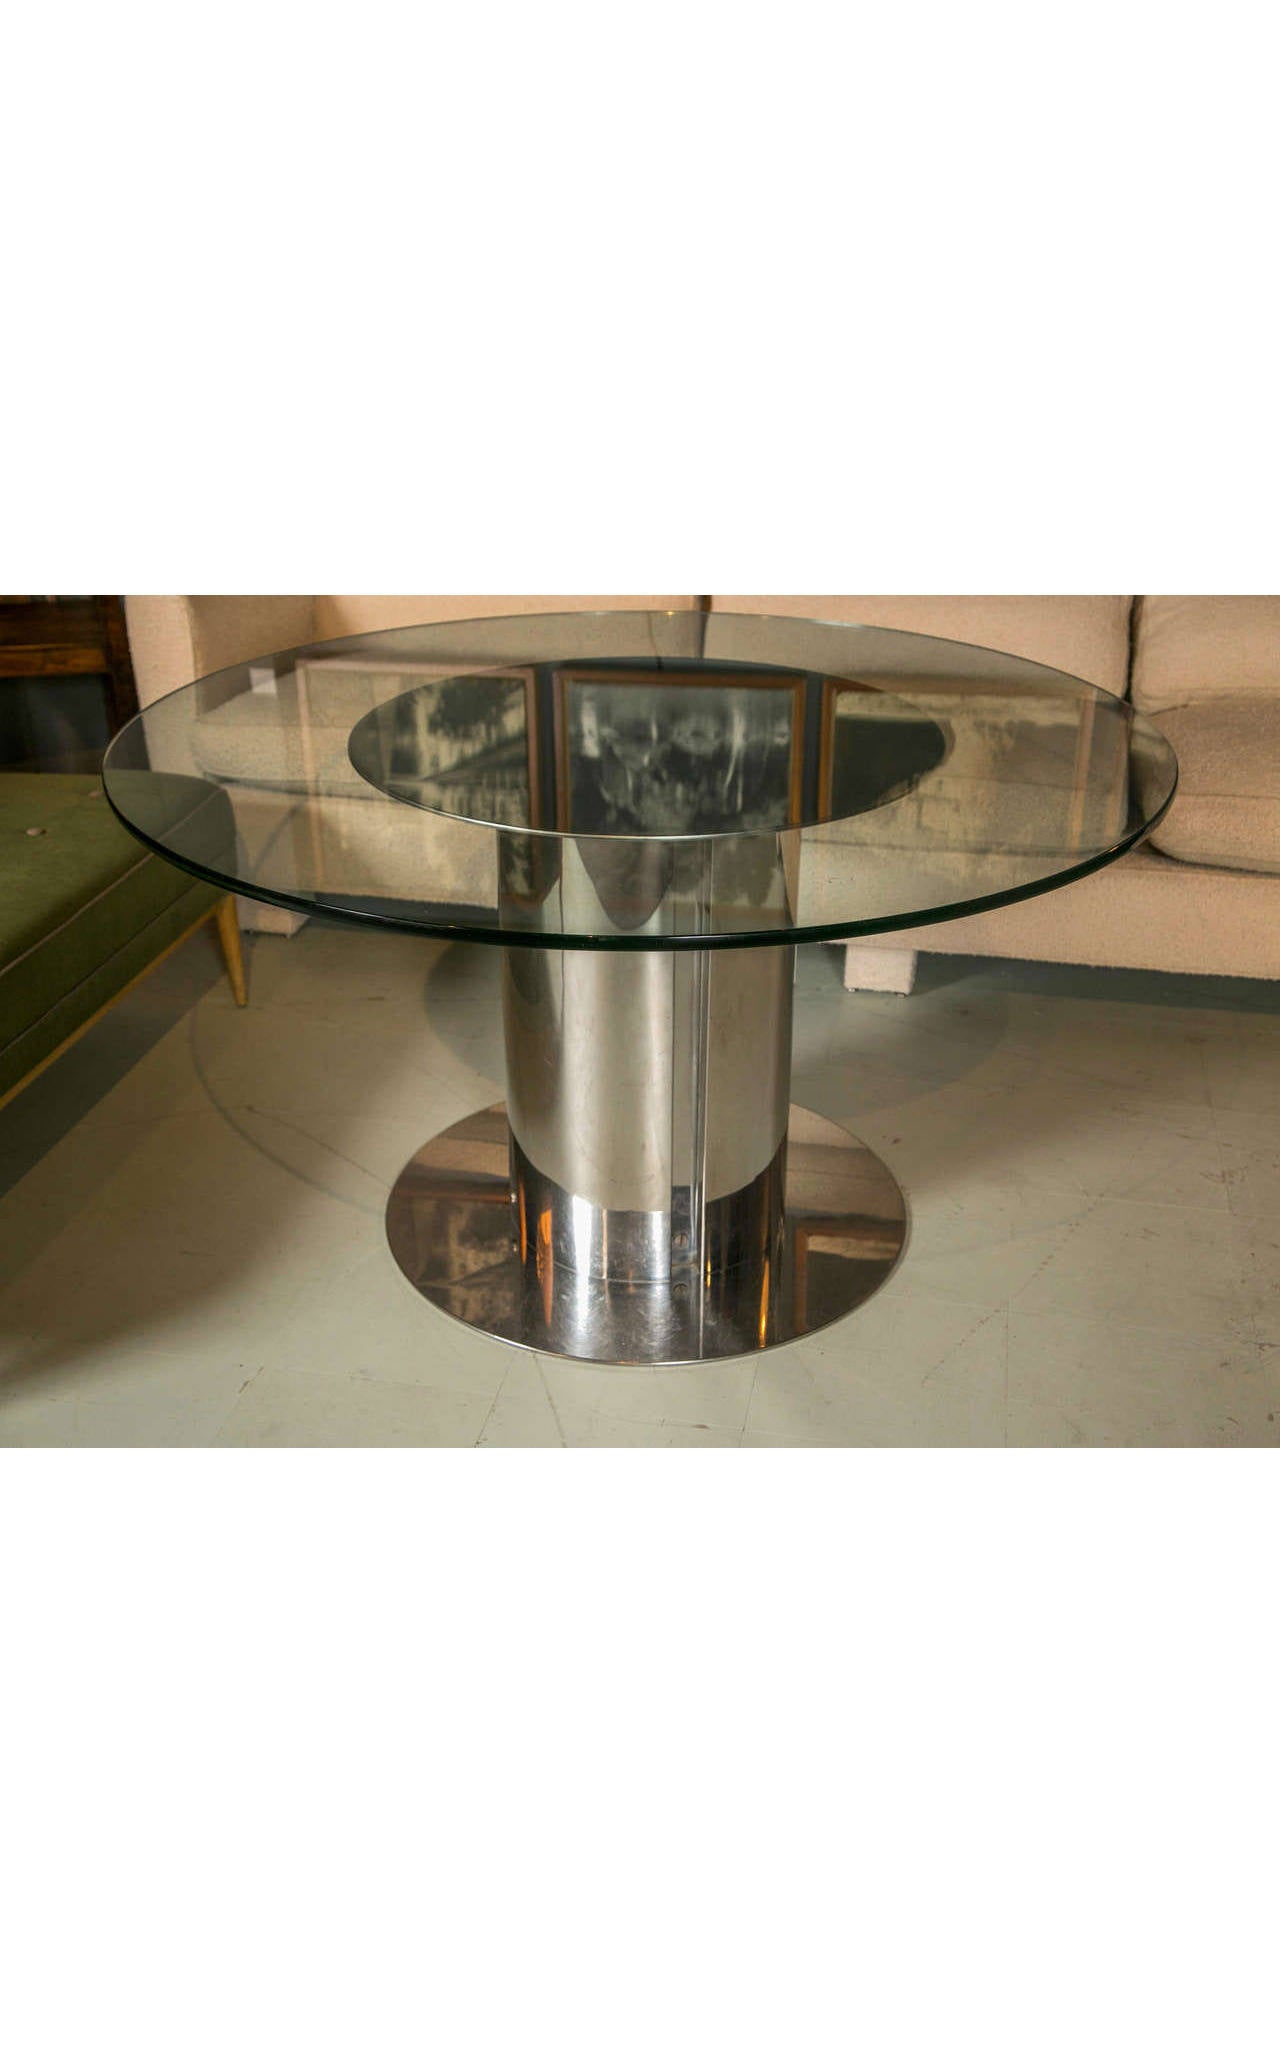 This round dining table is composed of a glass top and a polished chrome pedestal base. It's a simple but very striking design that creates the effect of spaciousness, with the mirror-quality of the chrome and the transparency of the glass.